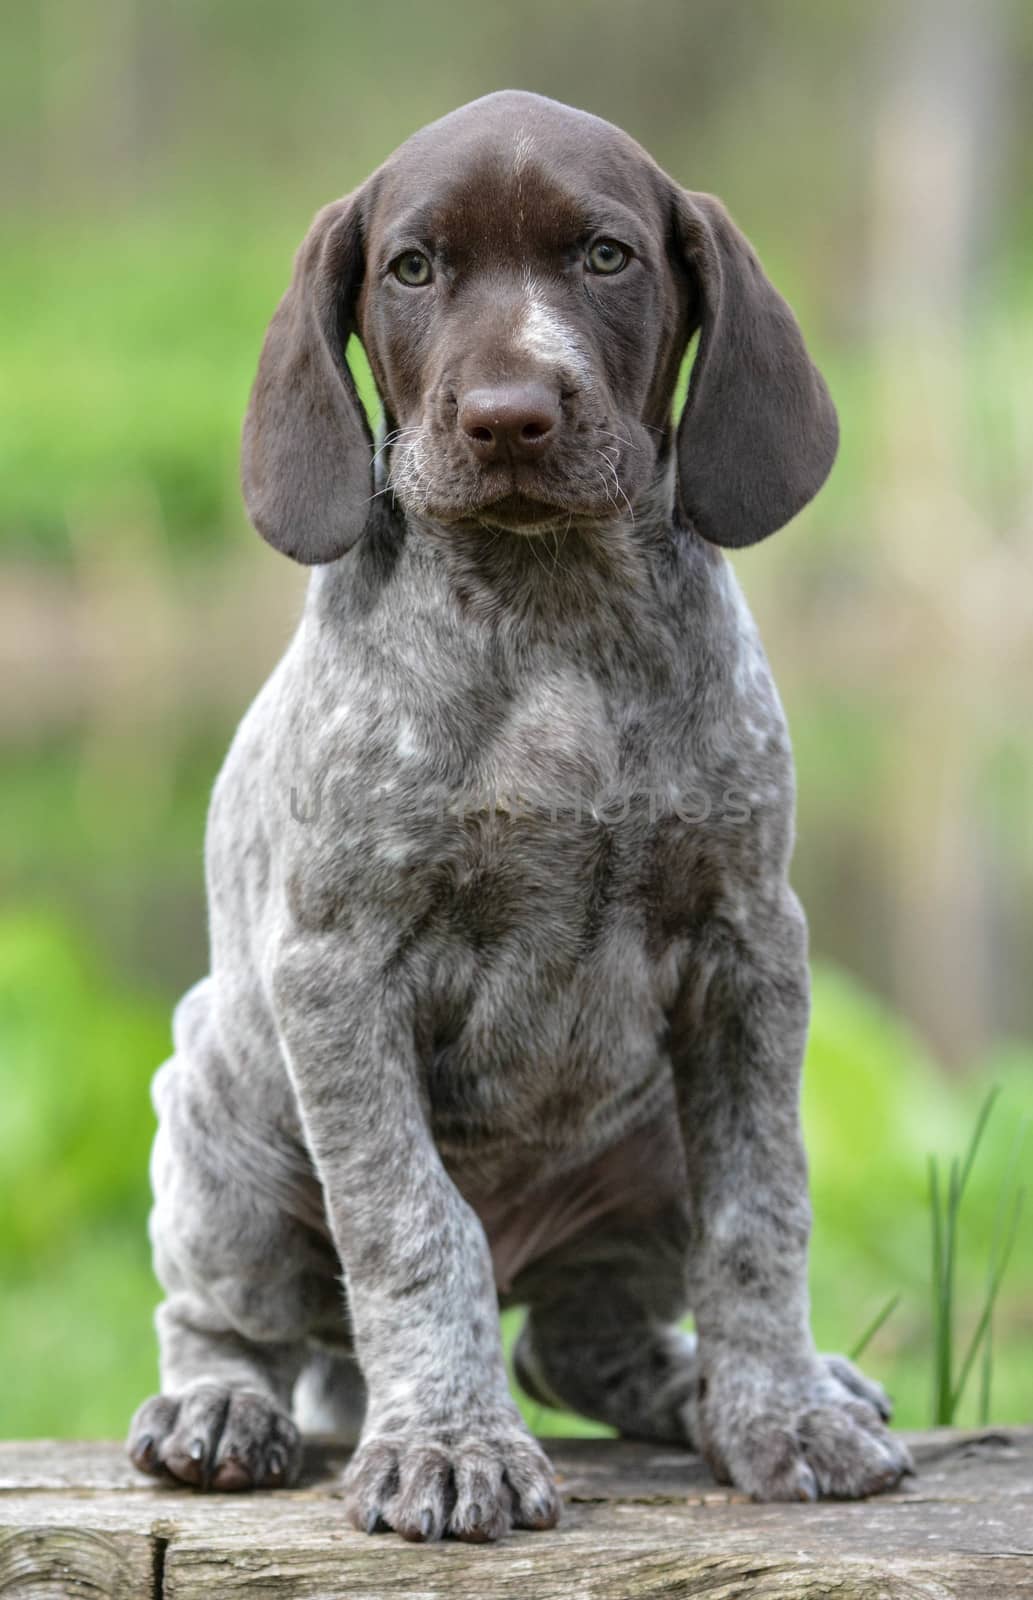 german shorthaired pointer puppy sitting on a log